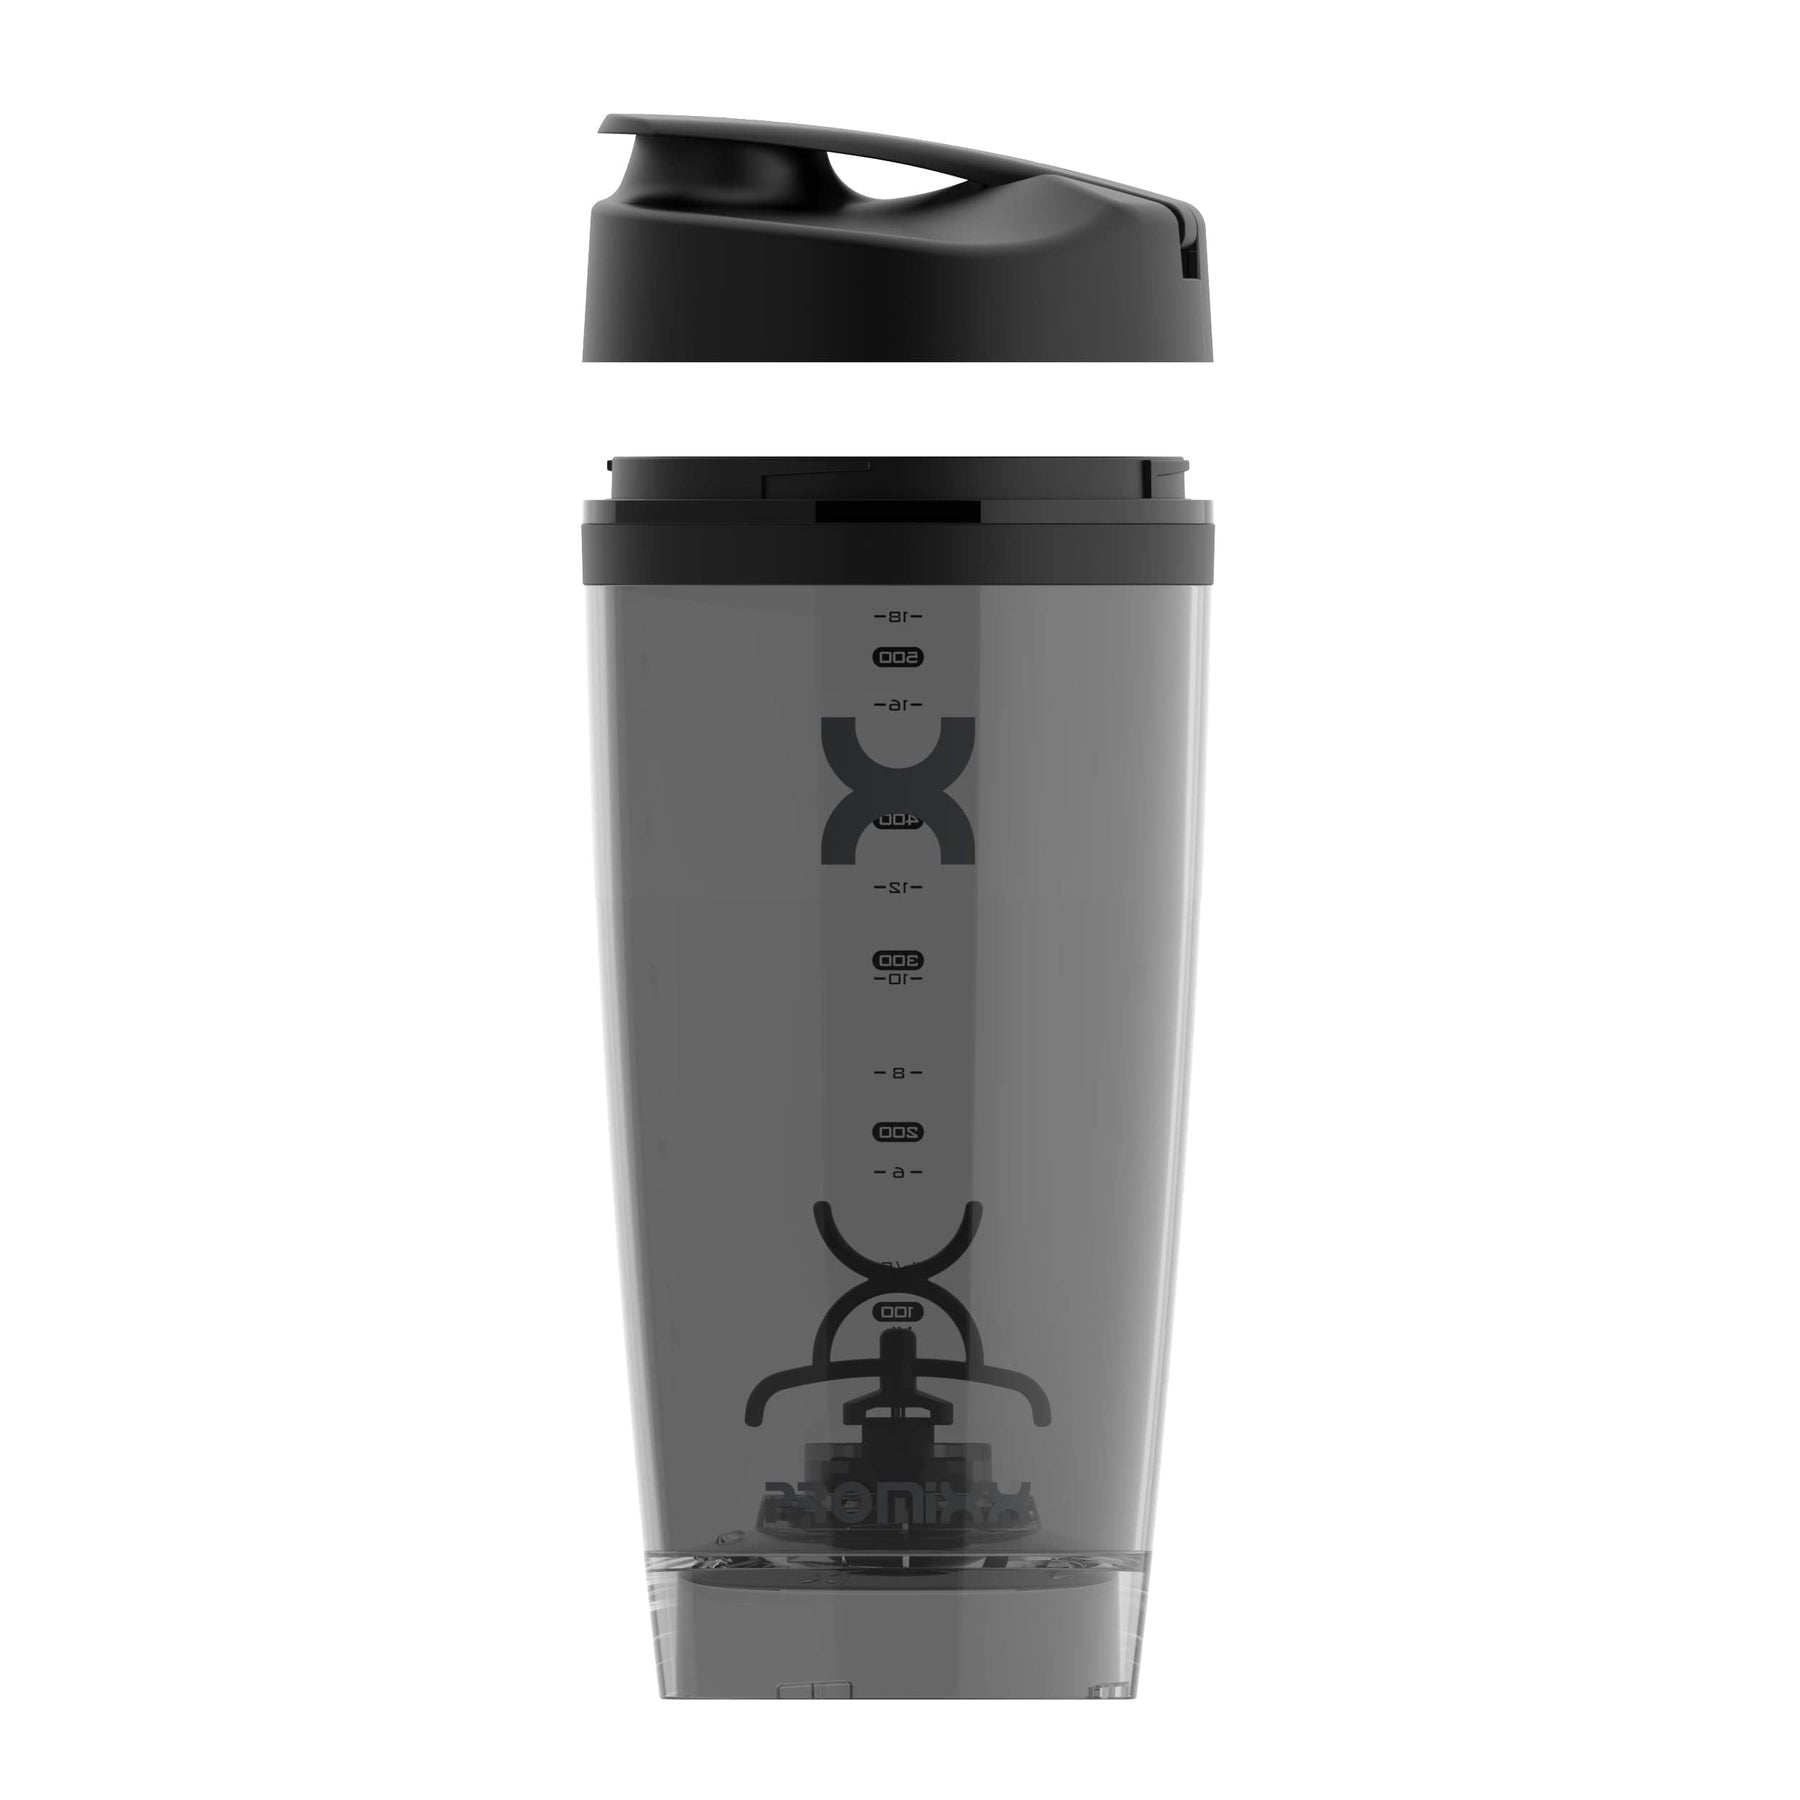 The brand new PROMiXX™ Shaker Bottle has arrived – say hello to